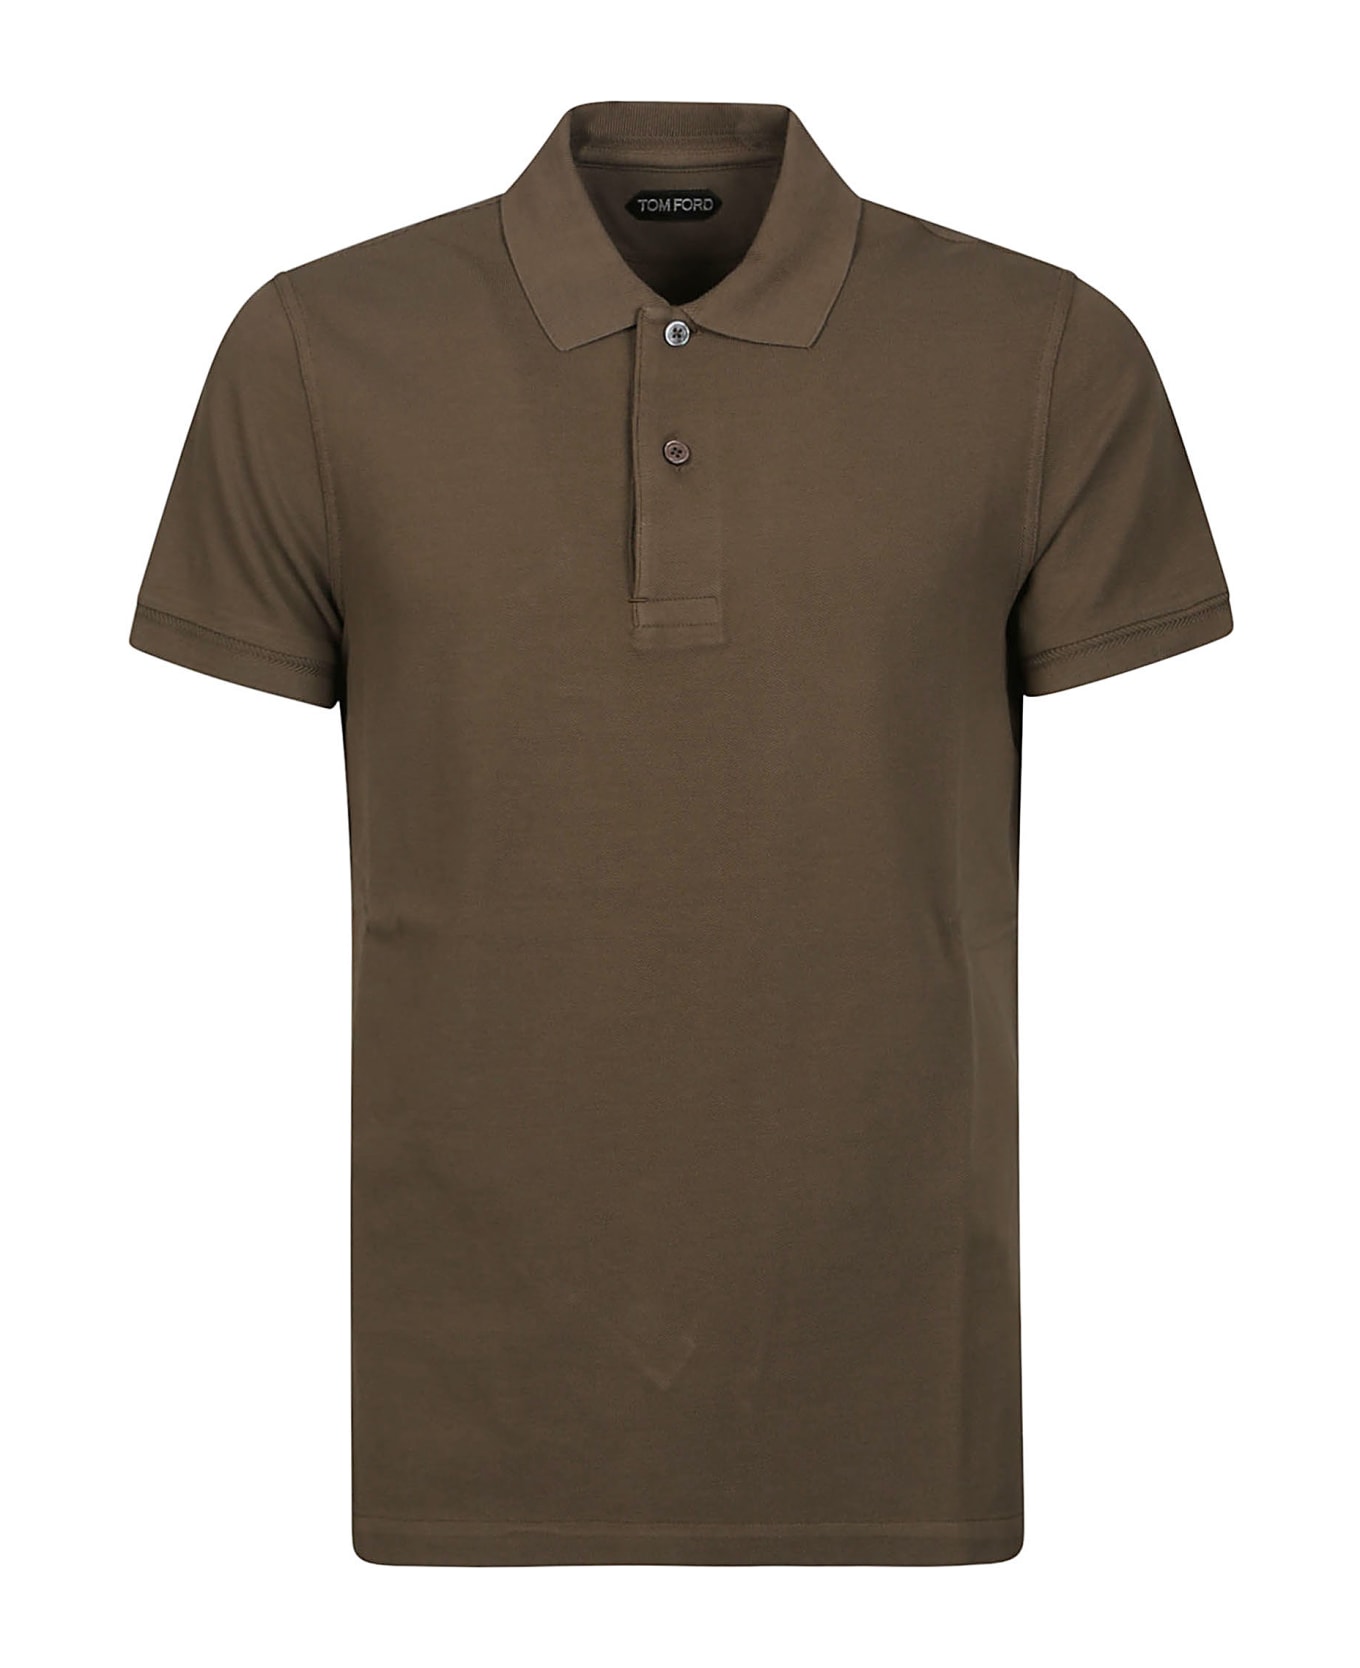 Tom Ford Tennis Piquet Short Sleeve Polo Shirt - Olive ポロシャツ